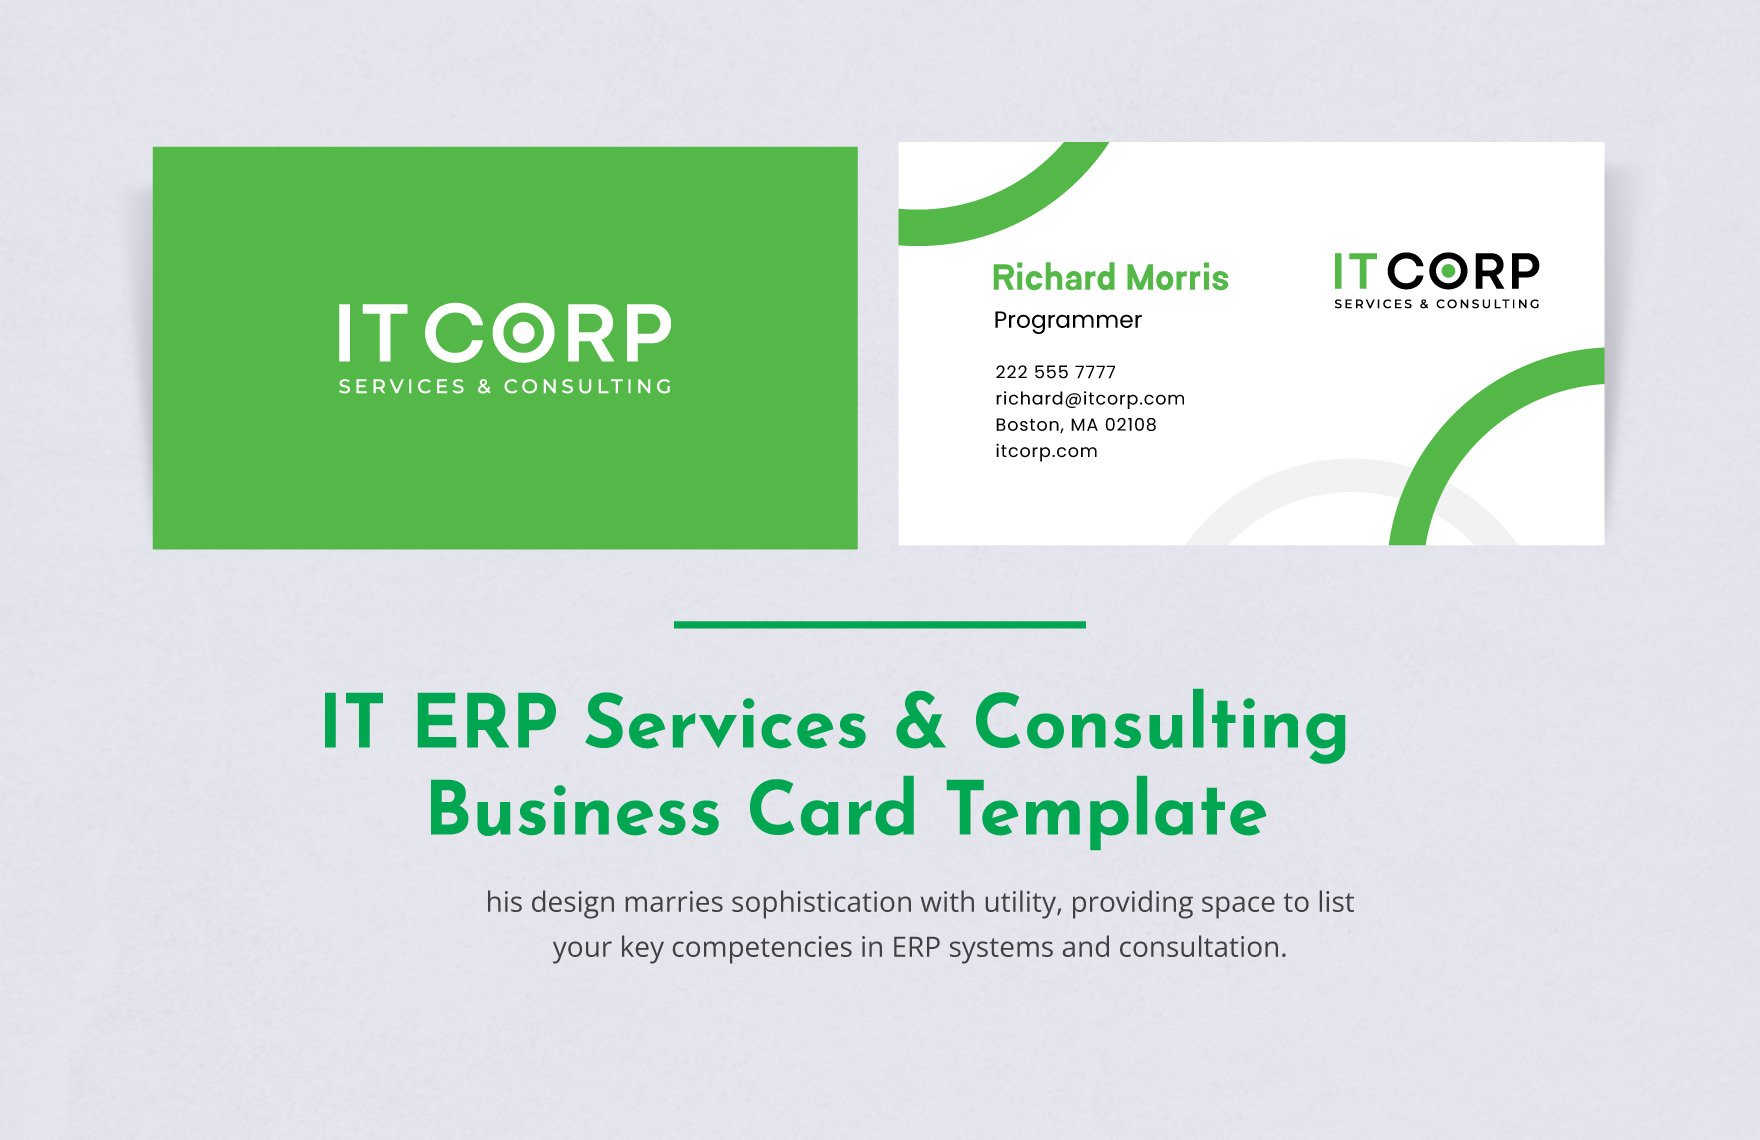 IT ERP Services & Consulting Business Card Template in Word, Illustrator, PSD